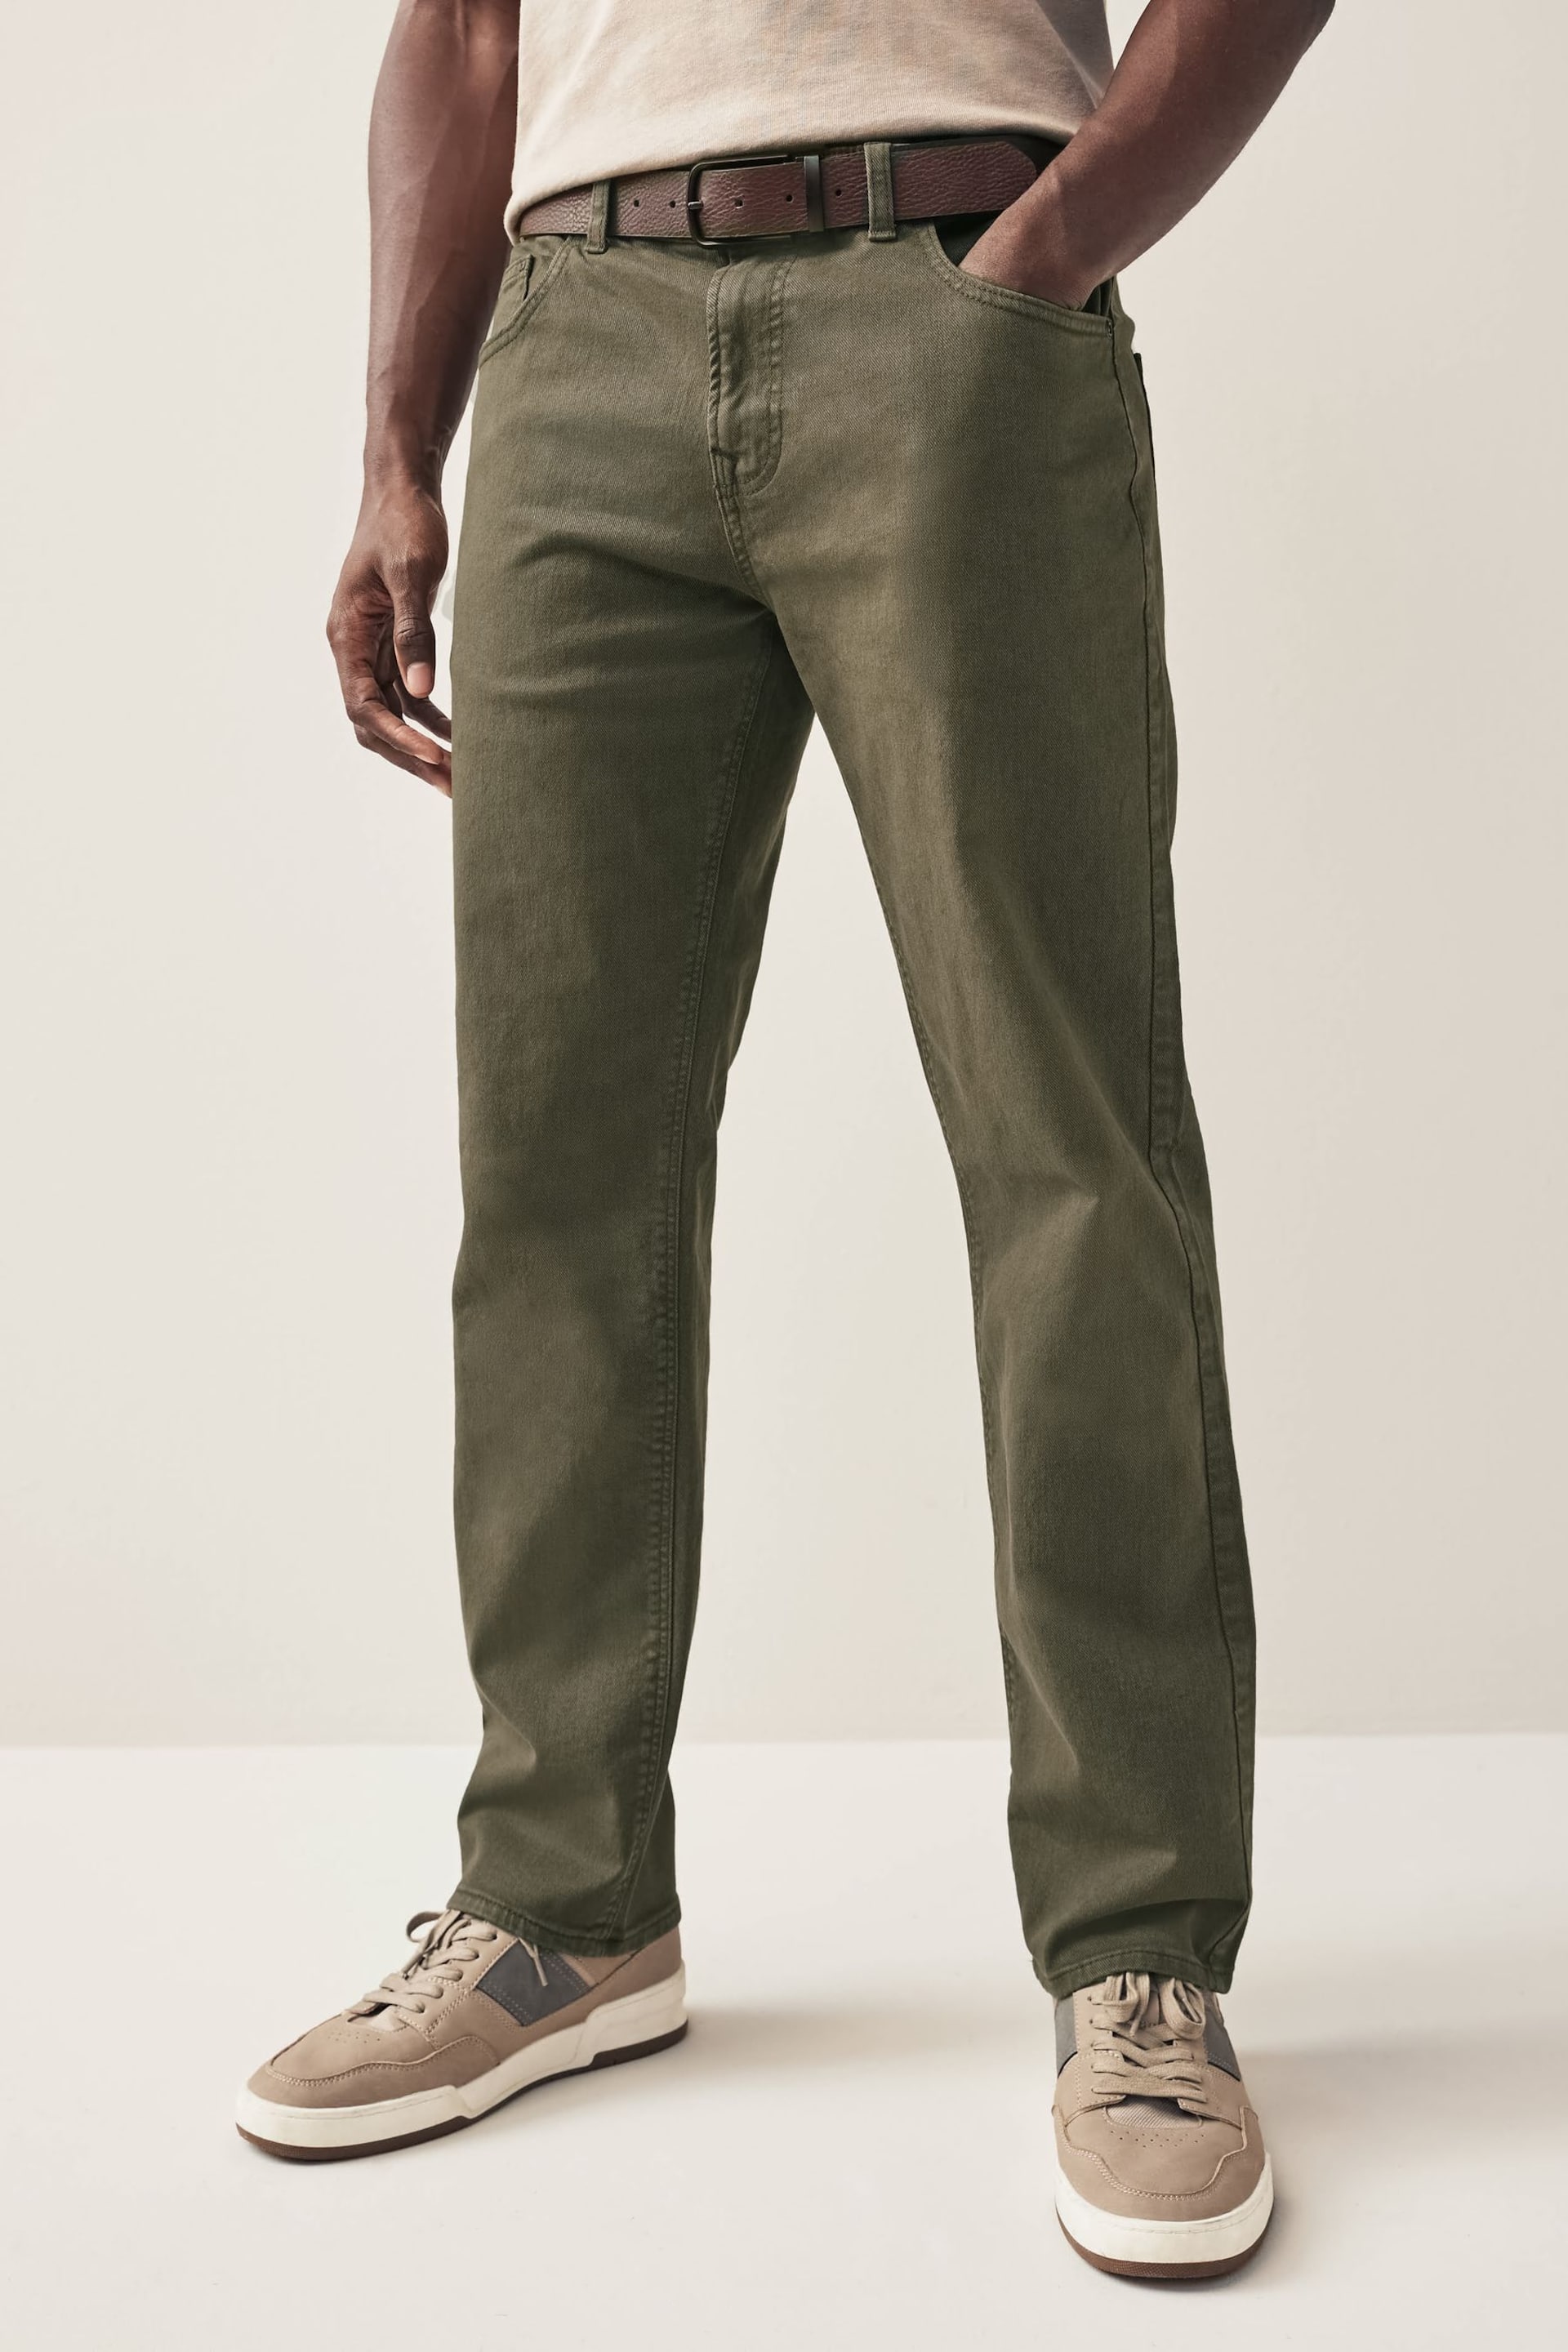 Khaki Green Straight Belted Authentic Jeans - Image 1 of 10